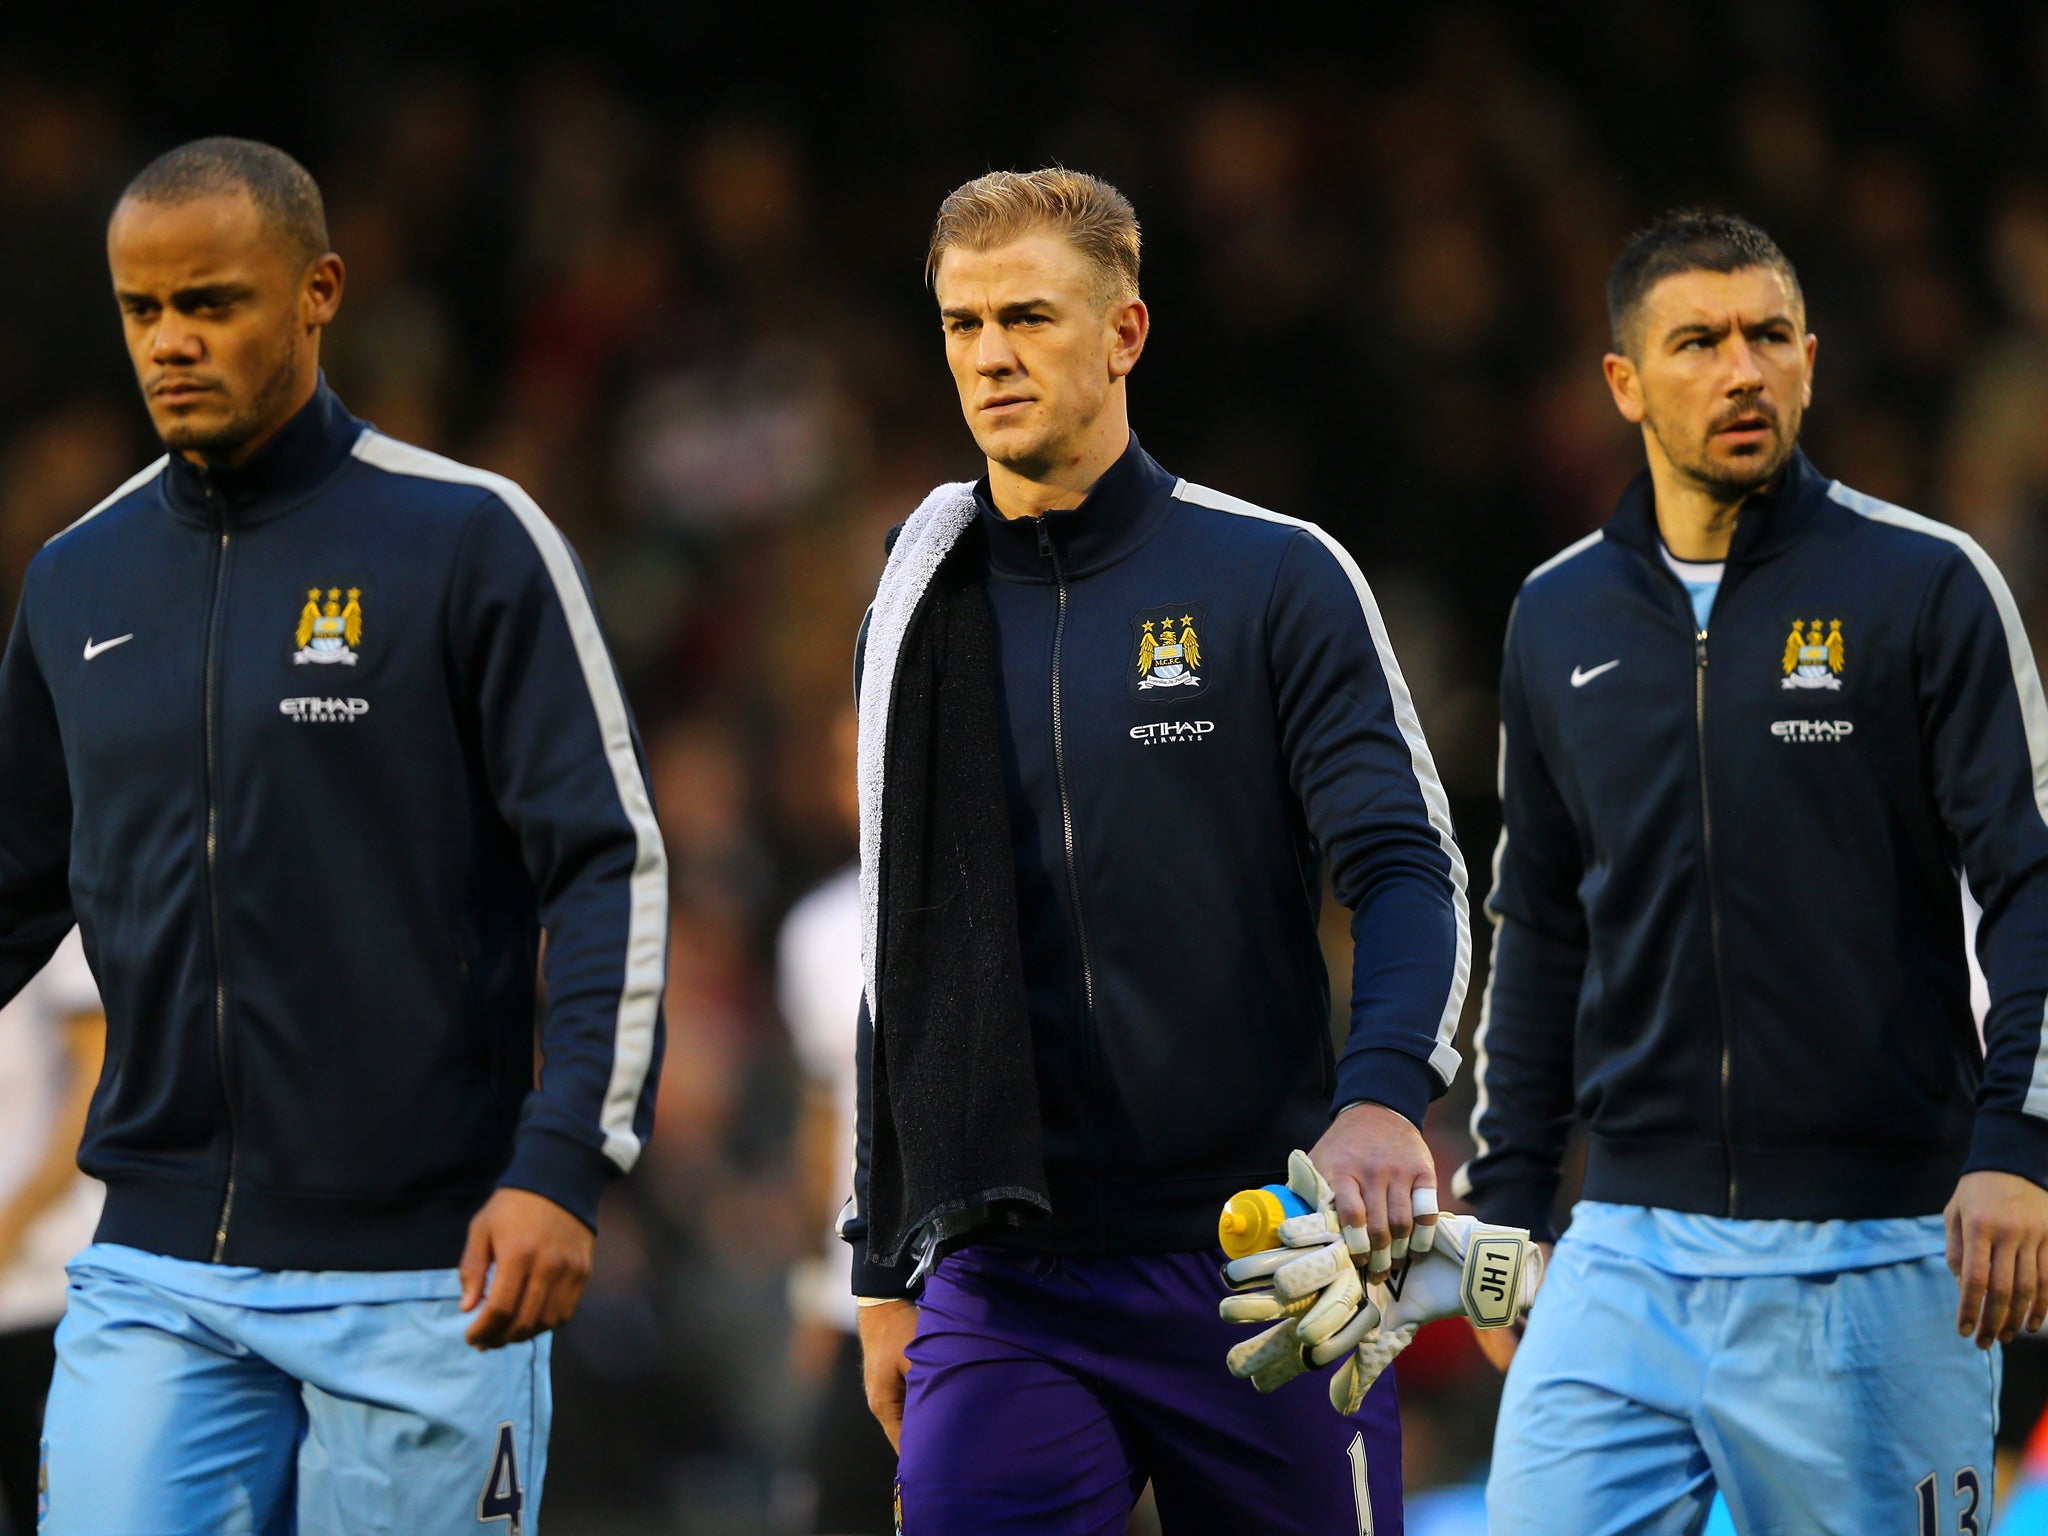 Joe Hart will continue in goal for Manchester City's Boxing Day clash with Liverpool